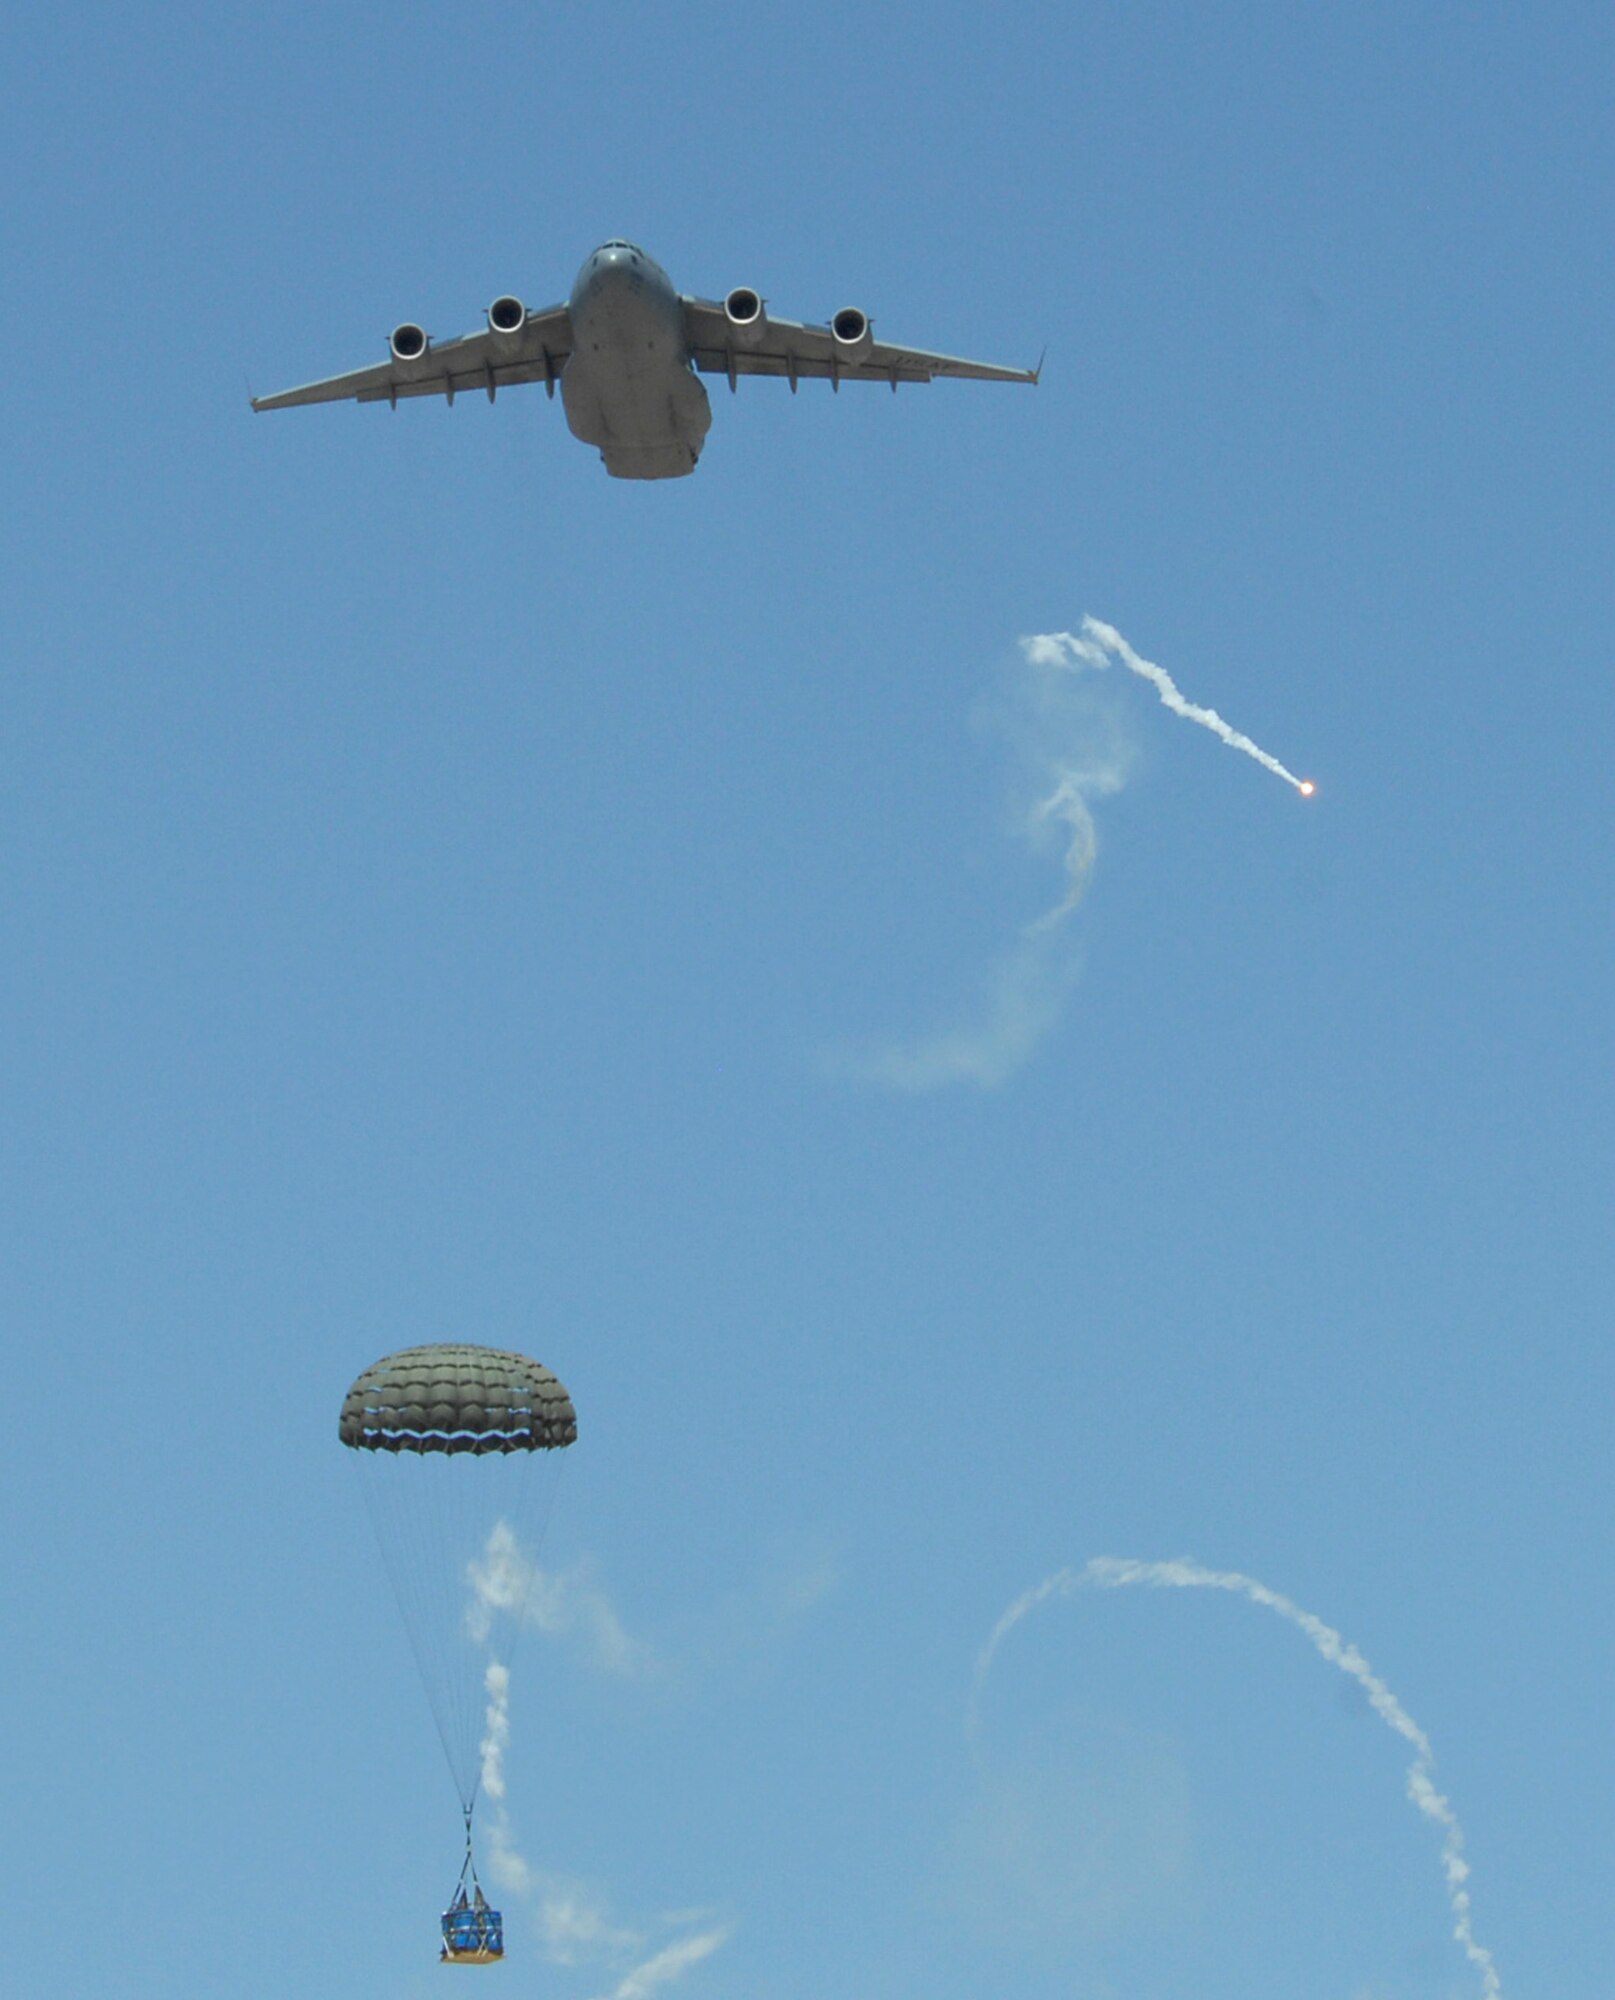 A C-17 Globemaster drops a container delivery system over the drop zone May 20 while participating in the Mobility Air Forces Exercise at Nellis Air Force Base, Nev.   (U.S. Air Force photo/Staff Sgt. Taylor Worley)

